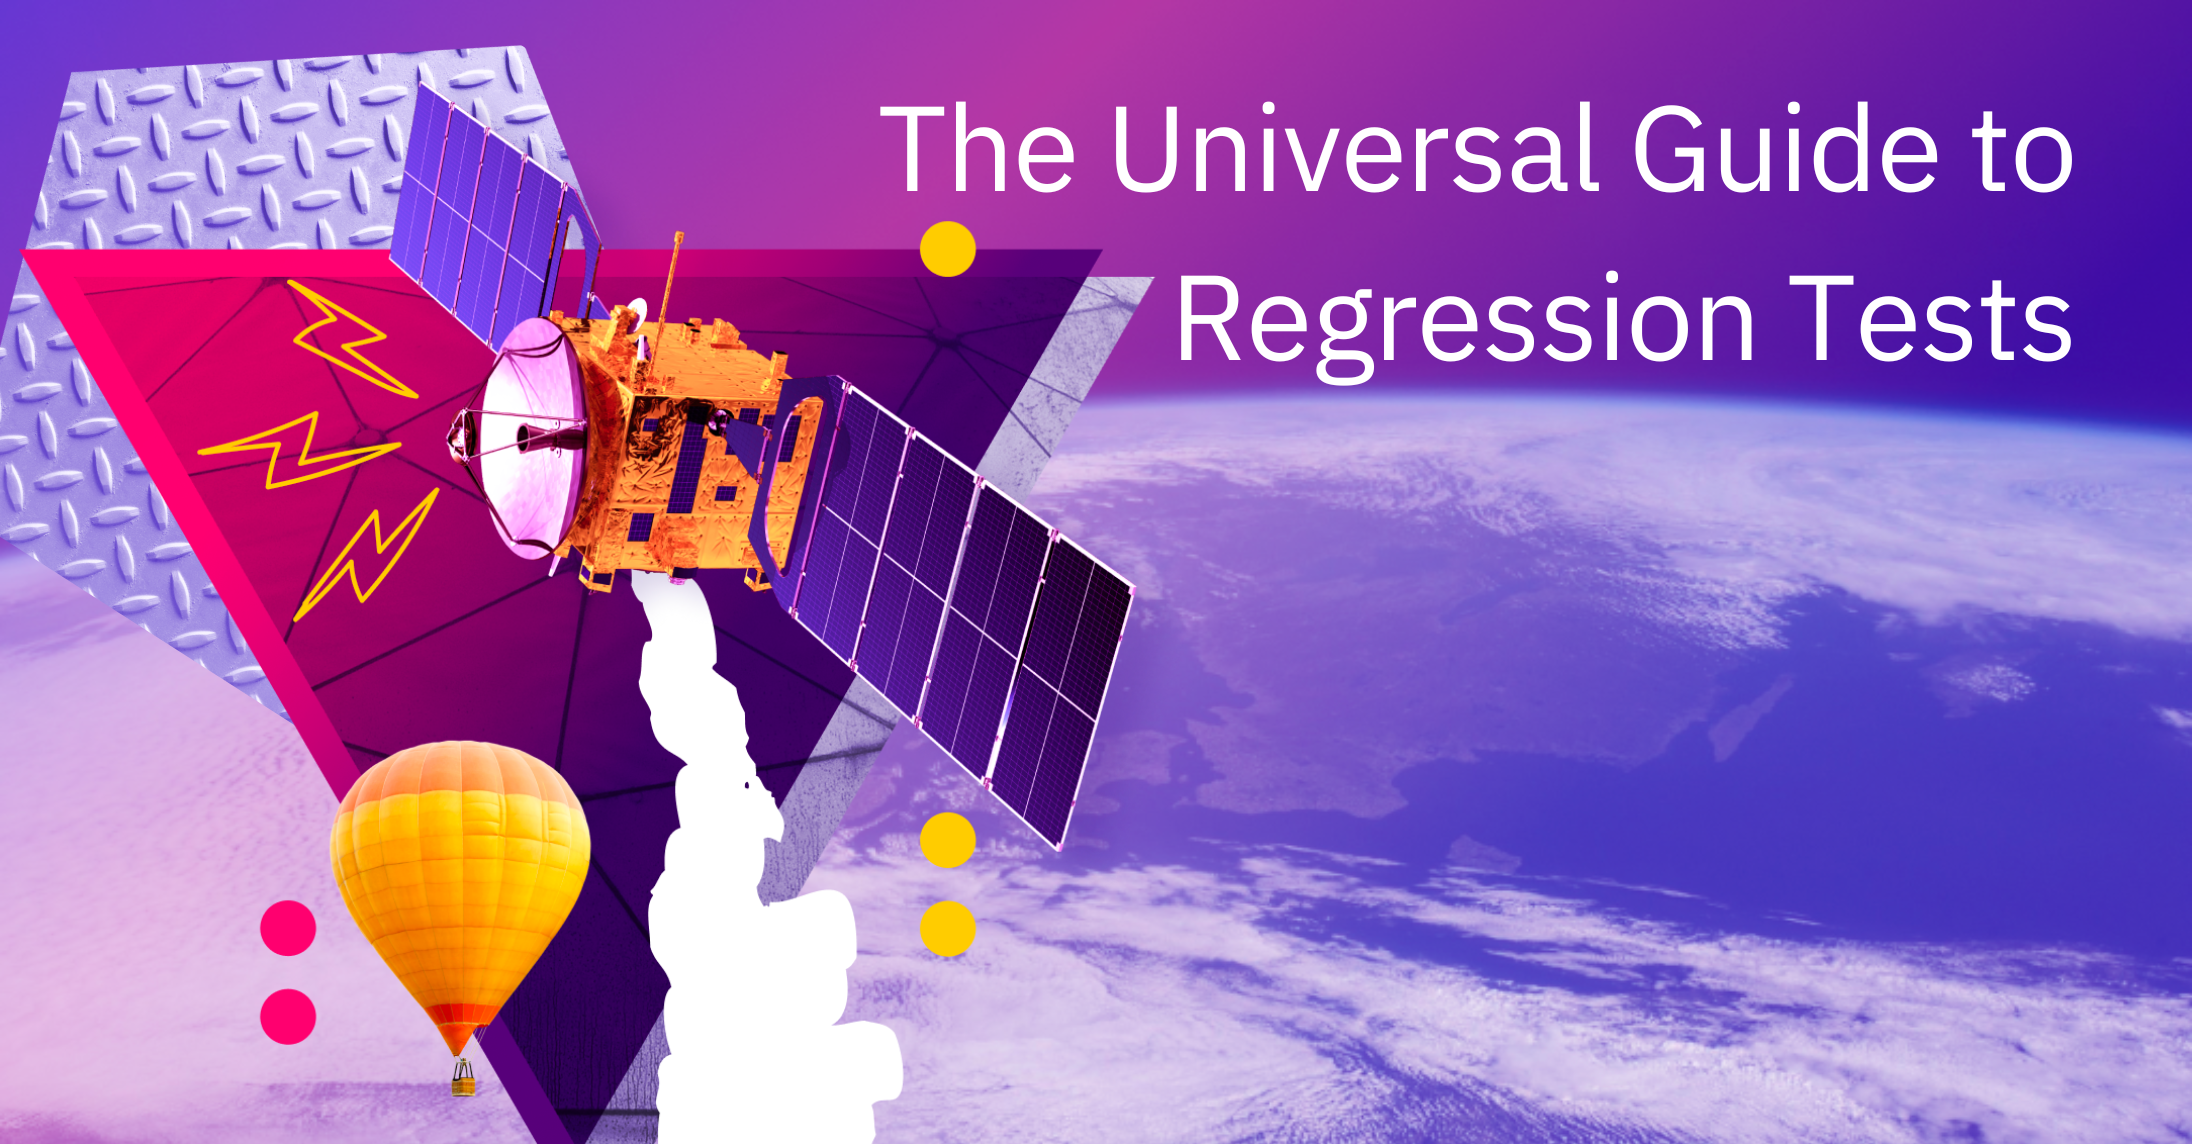 The Universal Guide to Regression Tests